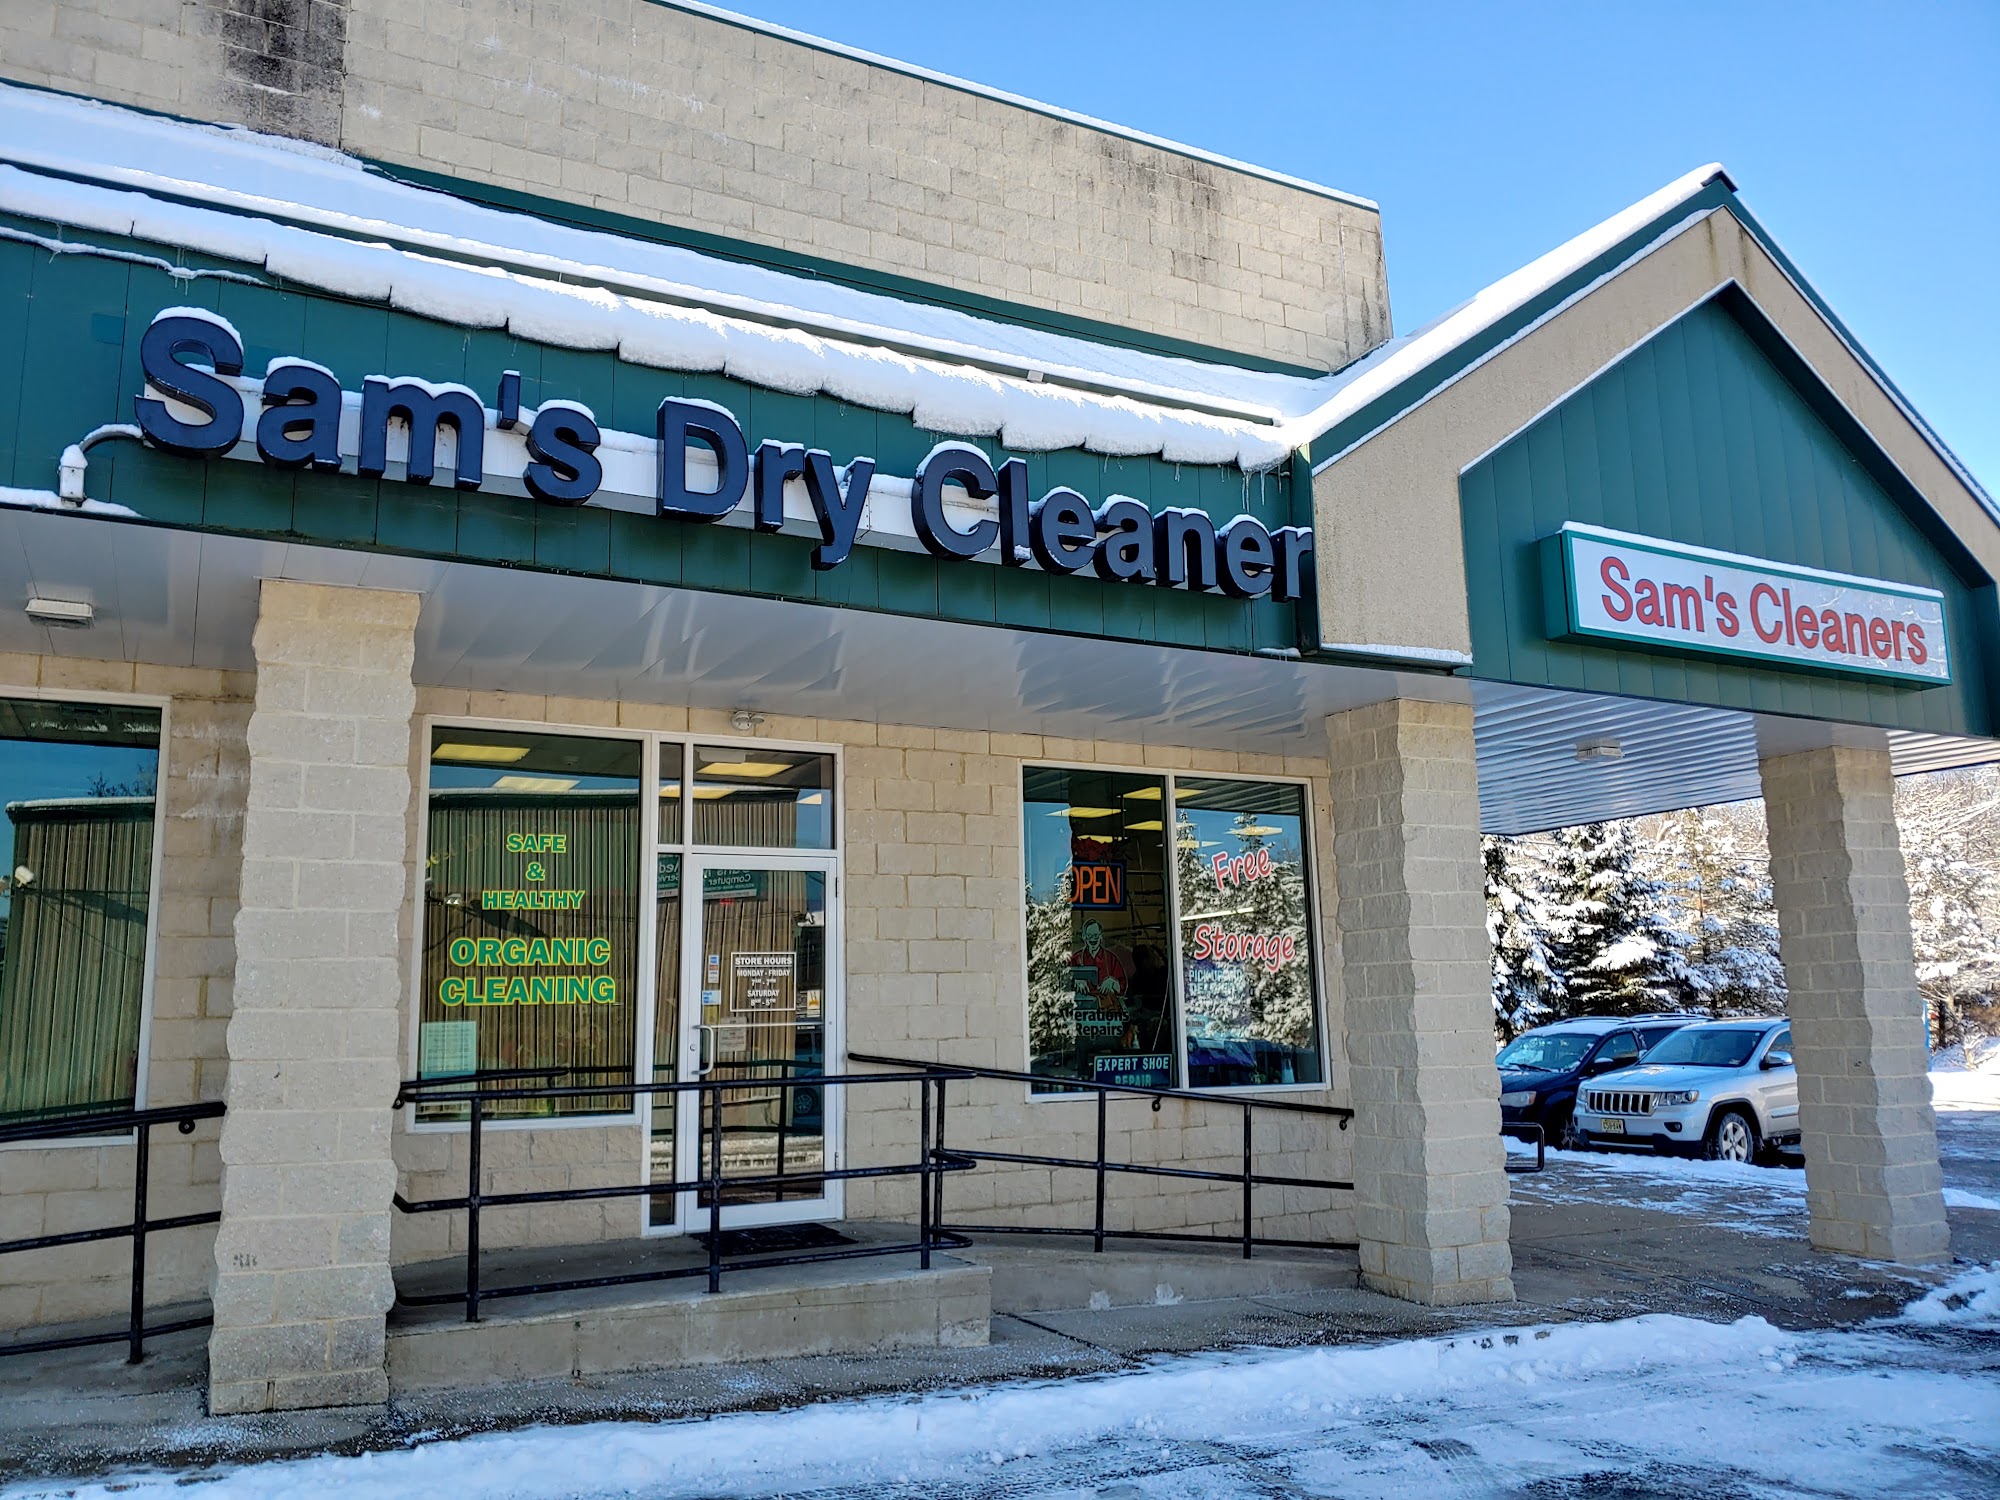 Sam's Dry Cleaners